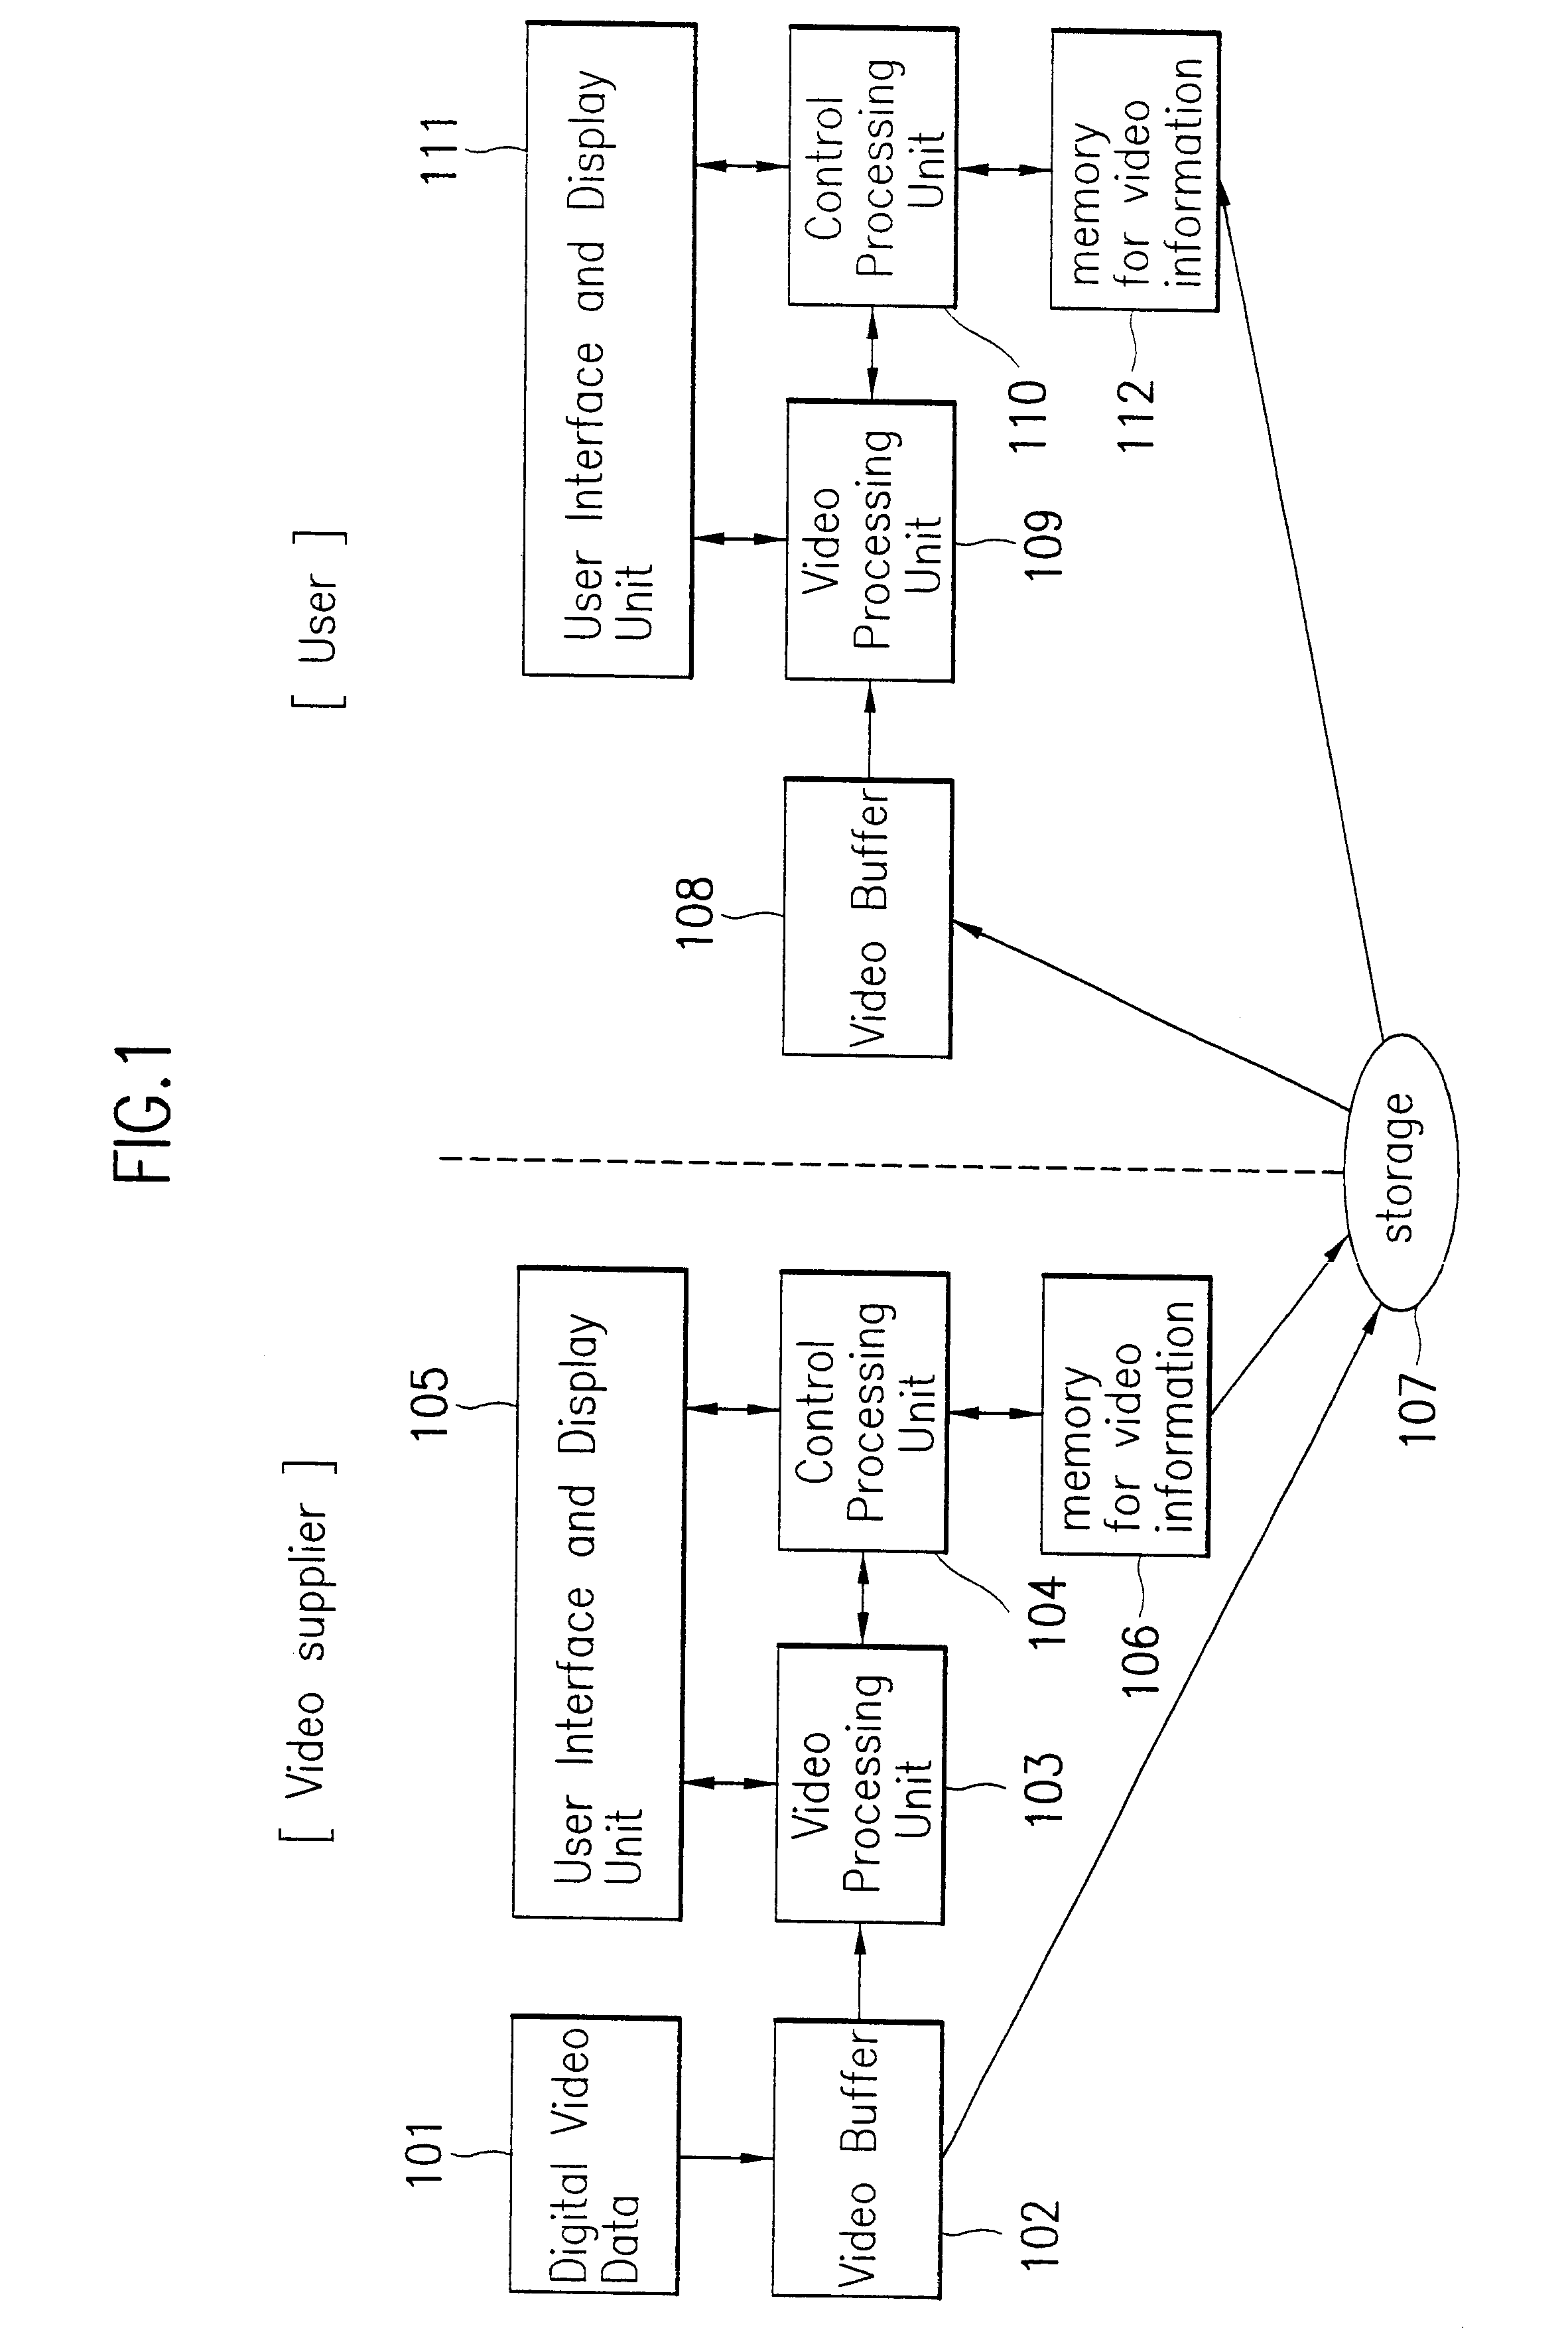 Motional video browsing data structure and browsing method therefor